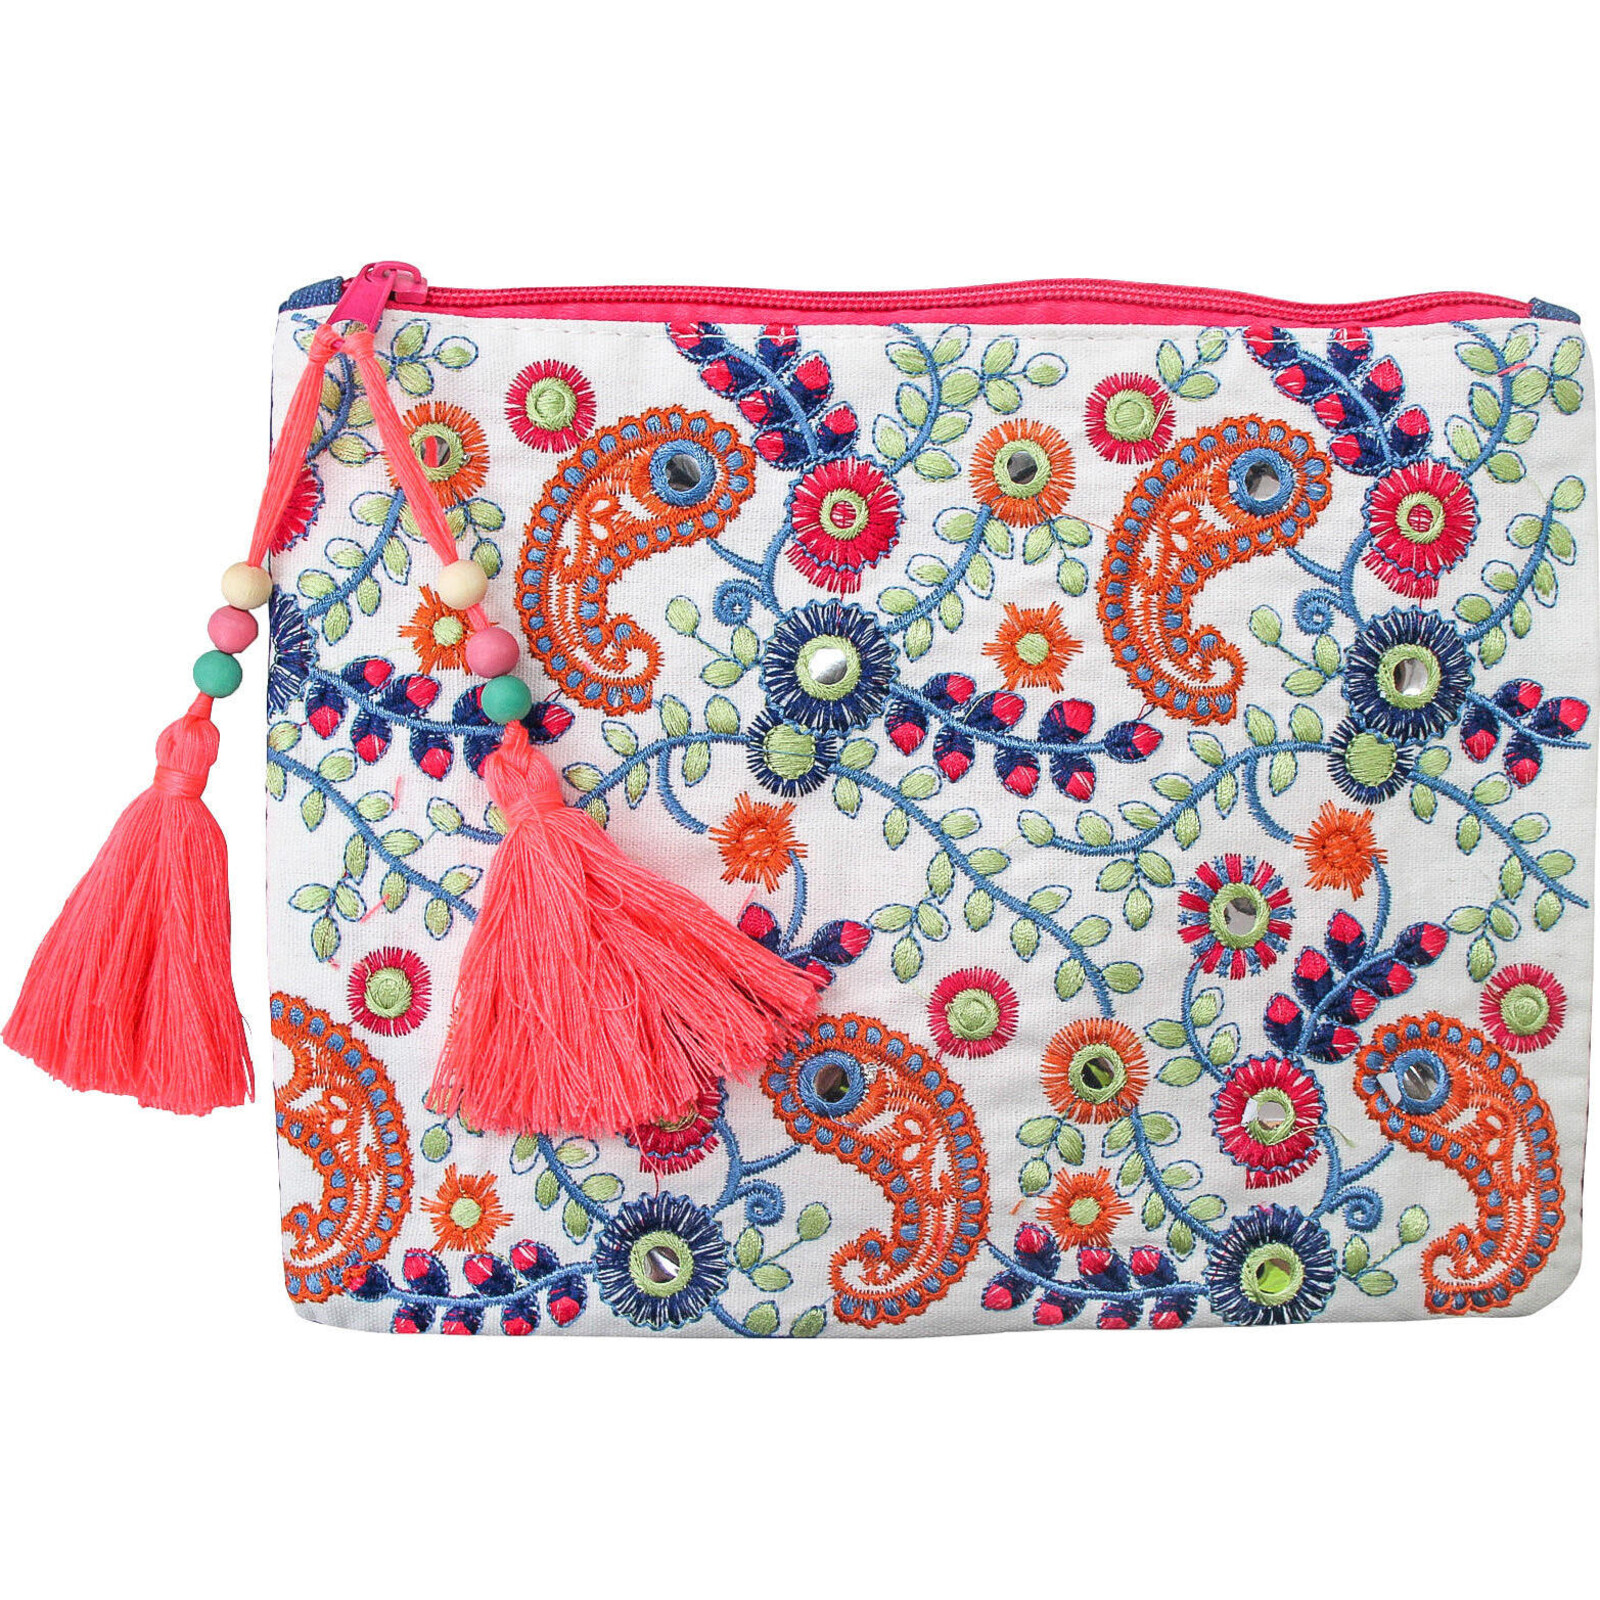 Purse Embroided Paisley